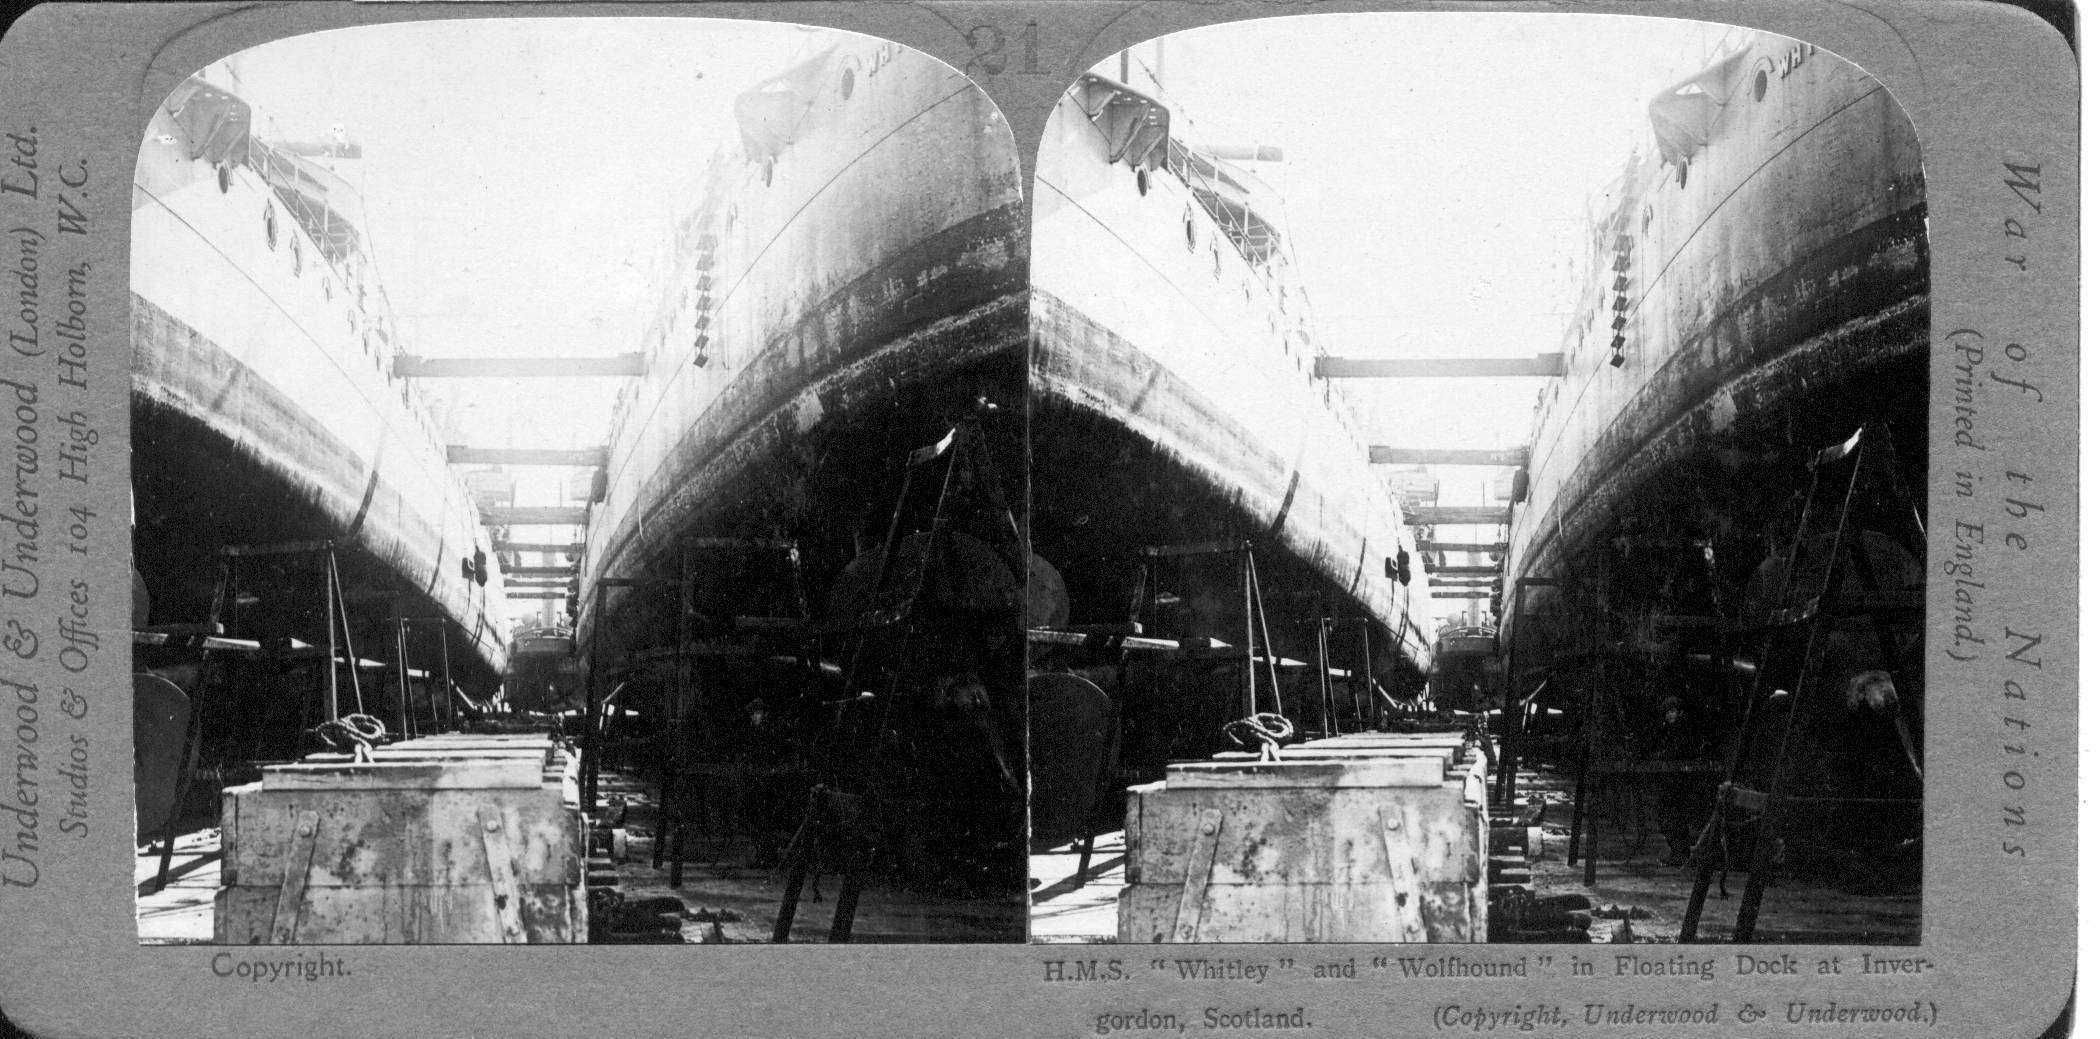 H.M.S. "Whitley" and "Wolfhound" in Floating Dock at Invergordon, Scotland